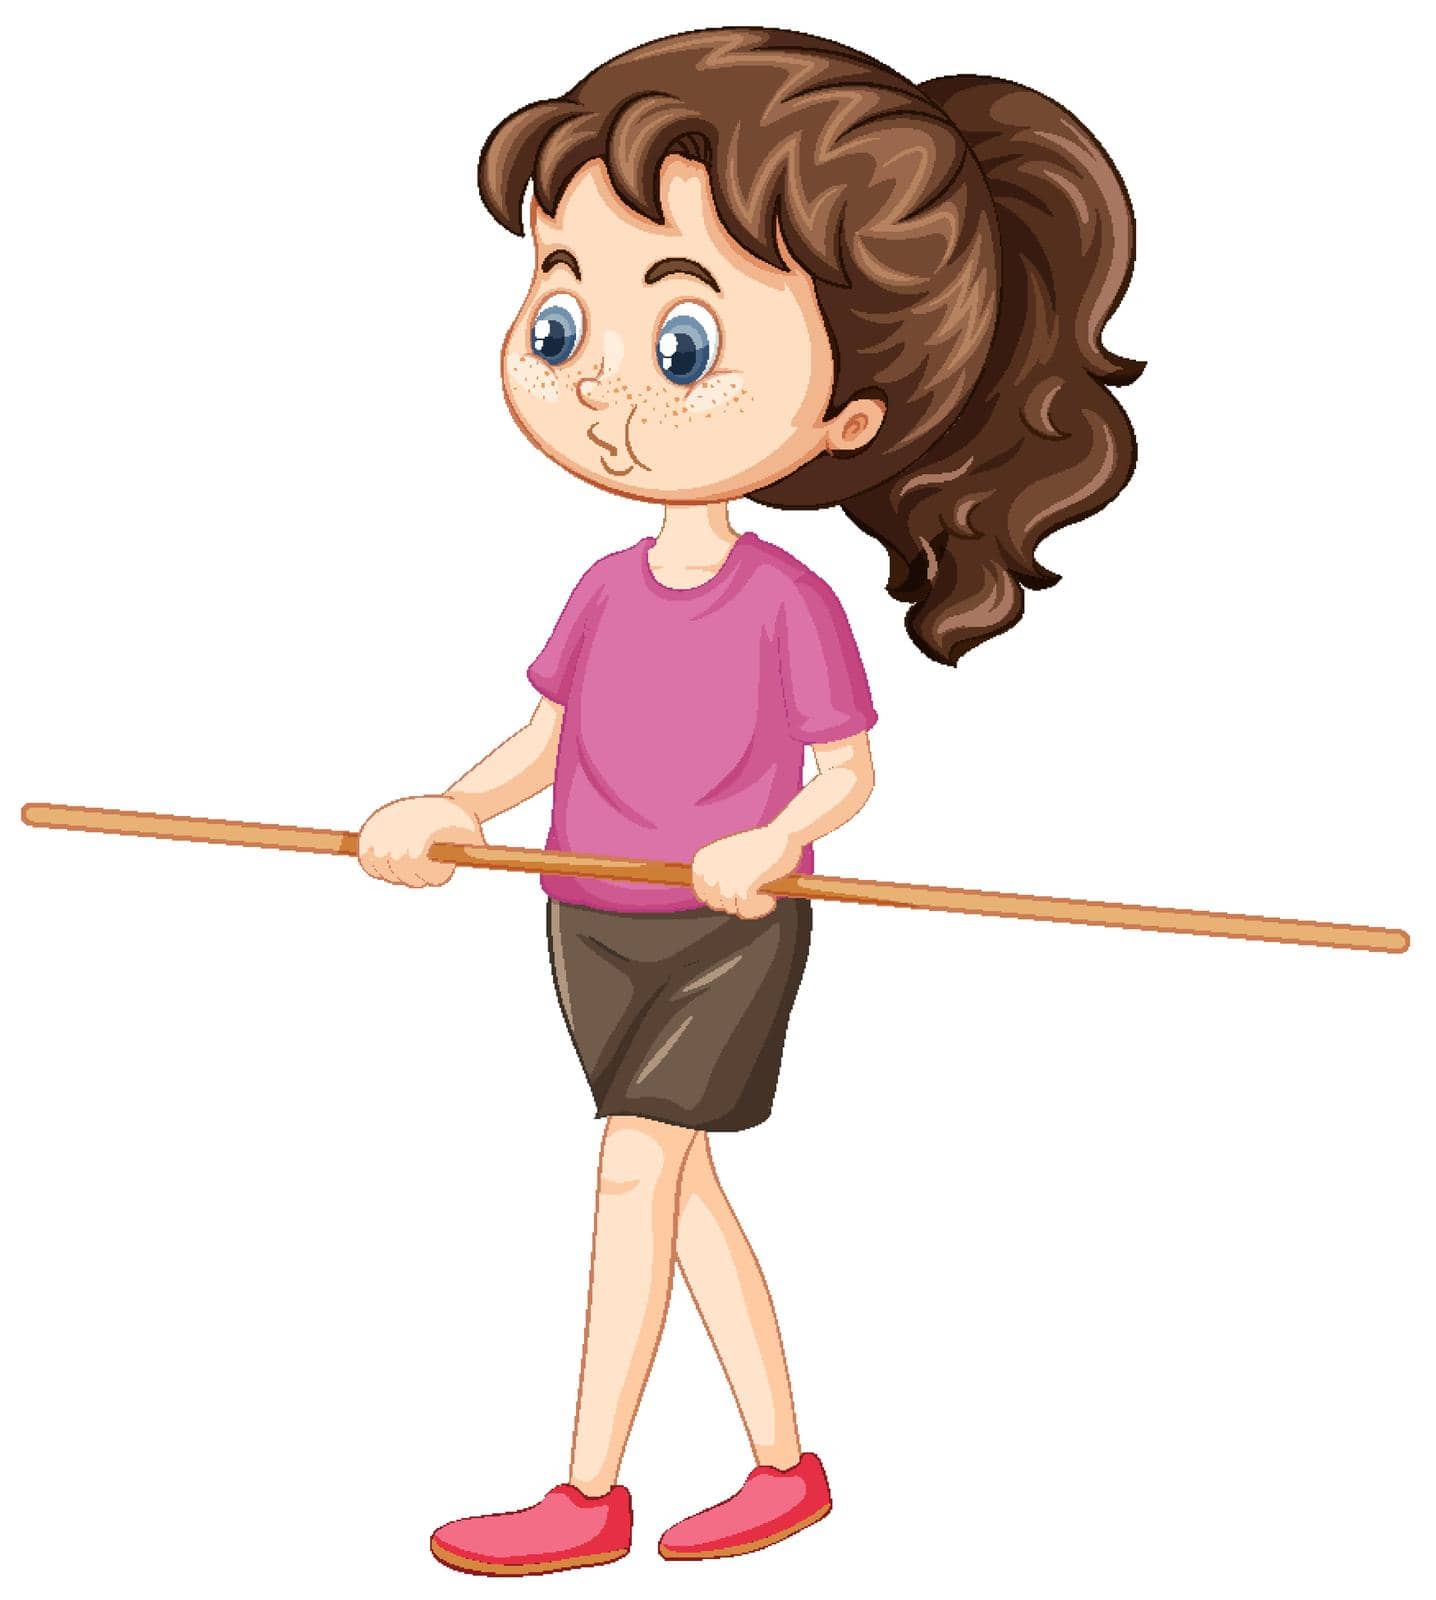 Cute girl standing and holding wooden handle illustration